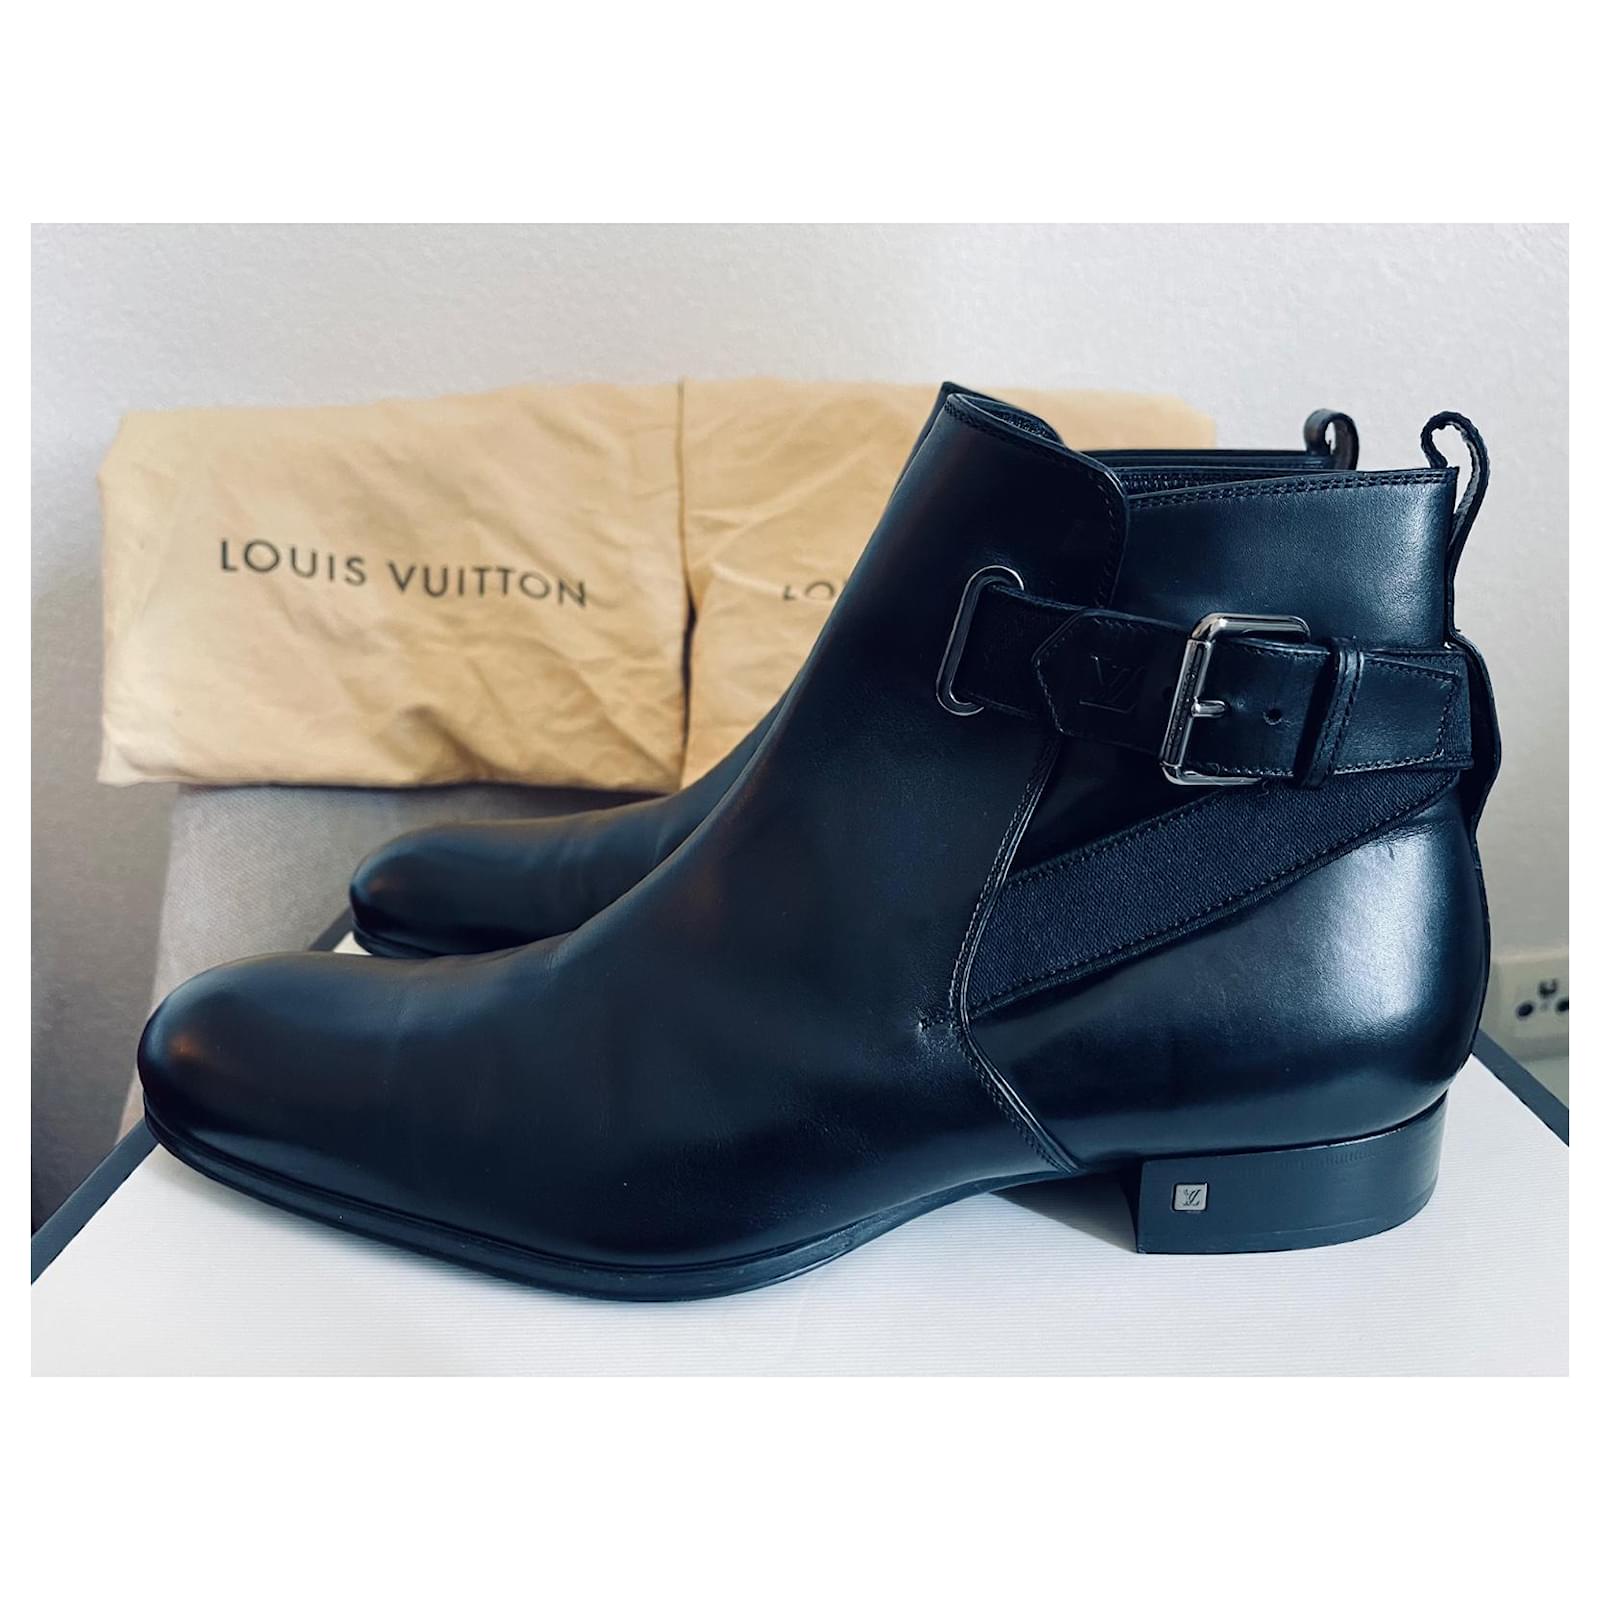 Louis Vuitton  Boots, Leather boots, Fashion boots